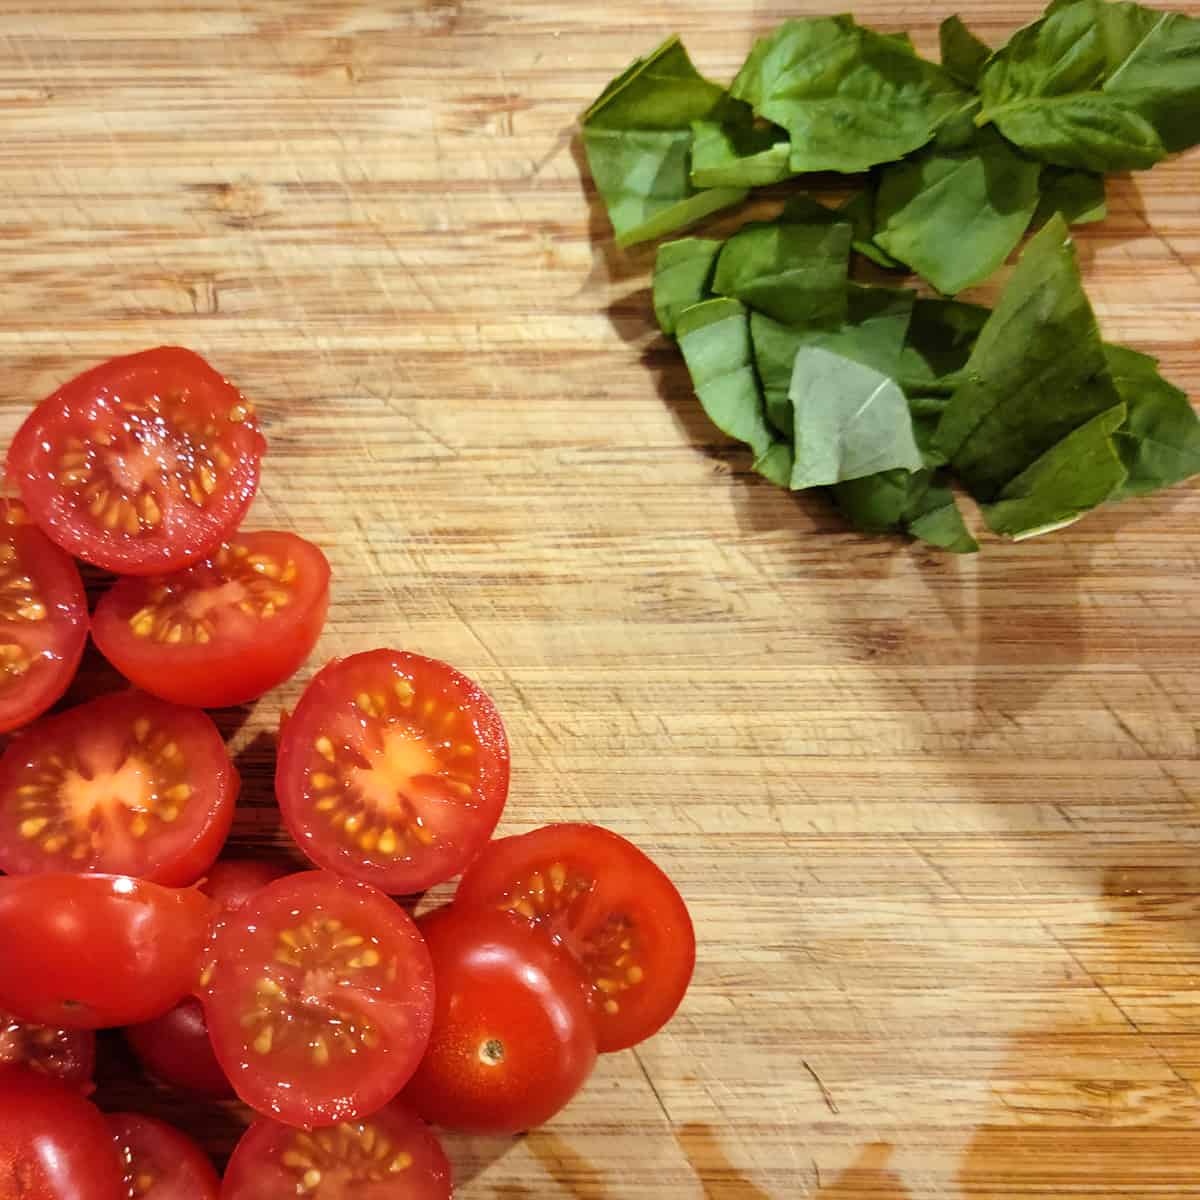 Prepared cherry tomatoes and basil leaves on a cutting board.